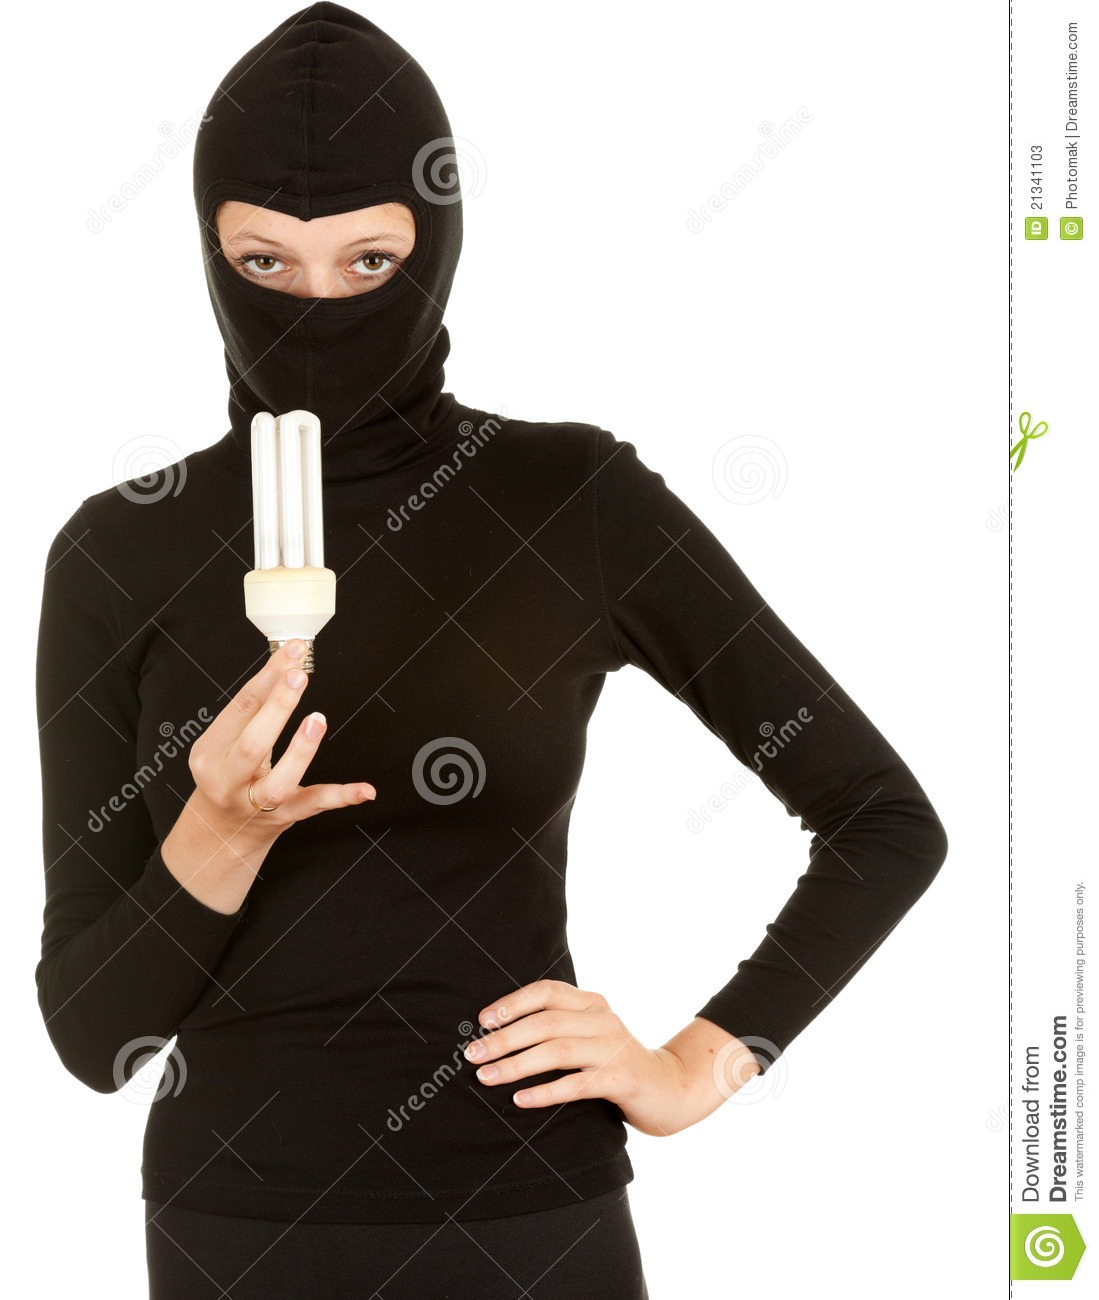 Female Thief In Black Clothes And Balaclava Stock Photos   Image